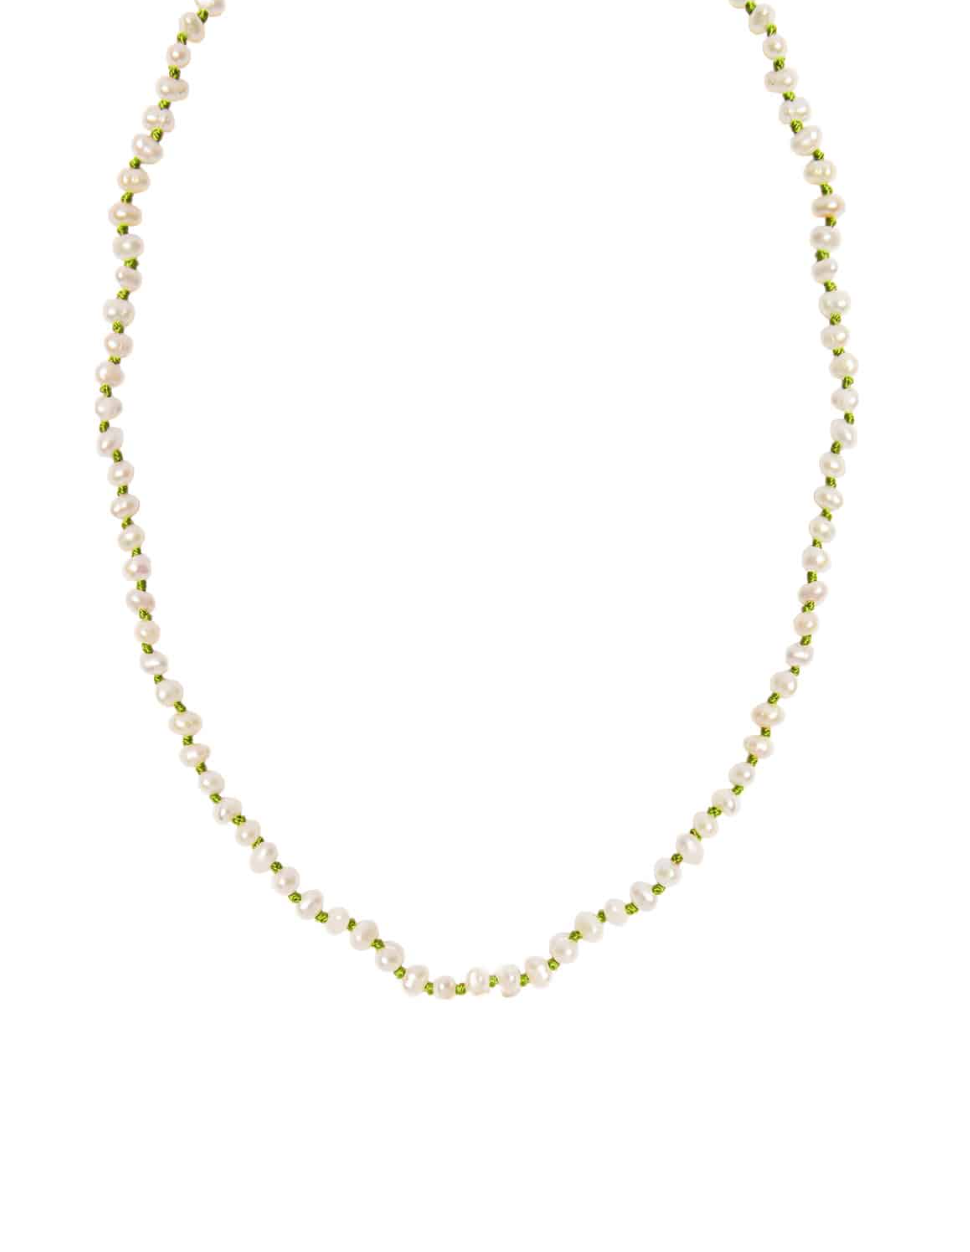 Wizard of Pearls Knotted Necklace - Olive